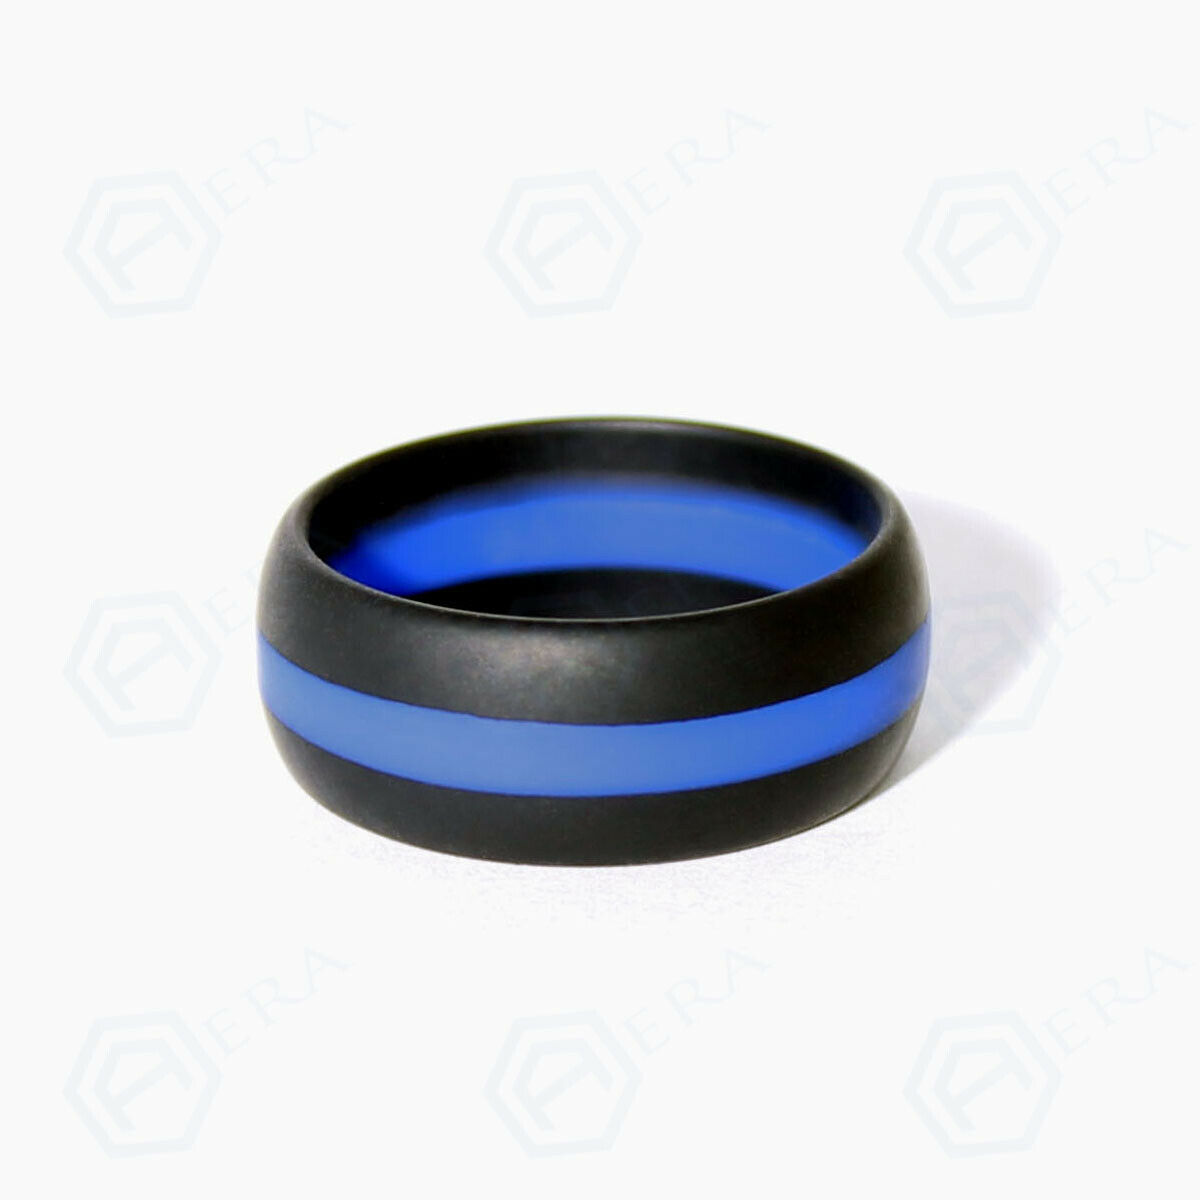 Thin Blue Line Silicone Wedding Ring Band Flexible Activewear By Aera Rings